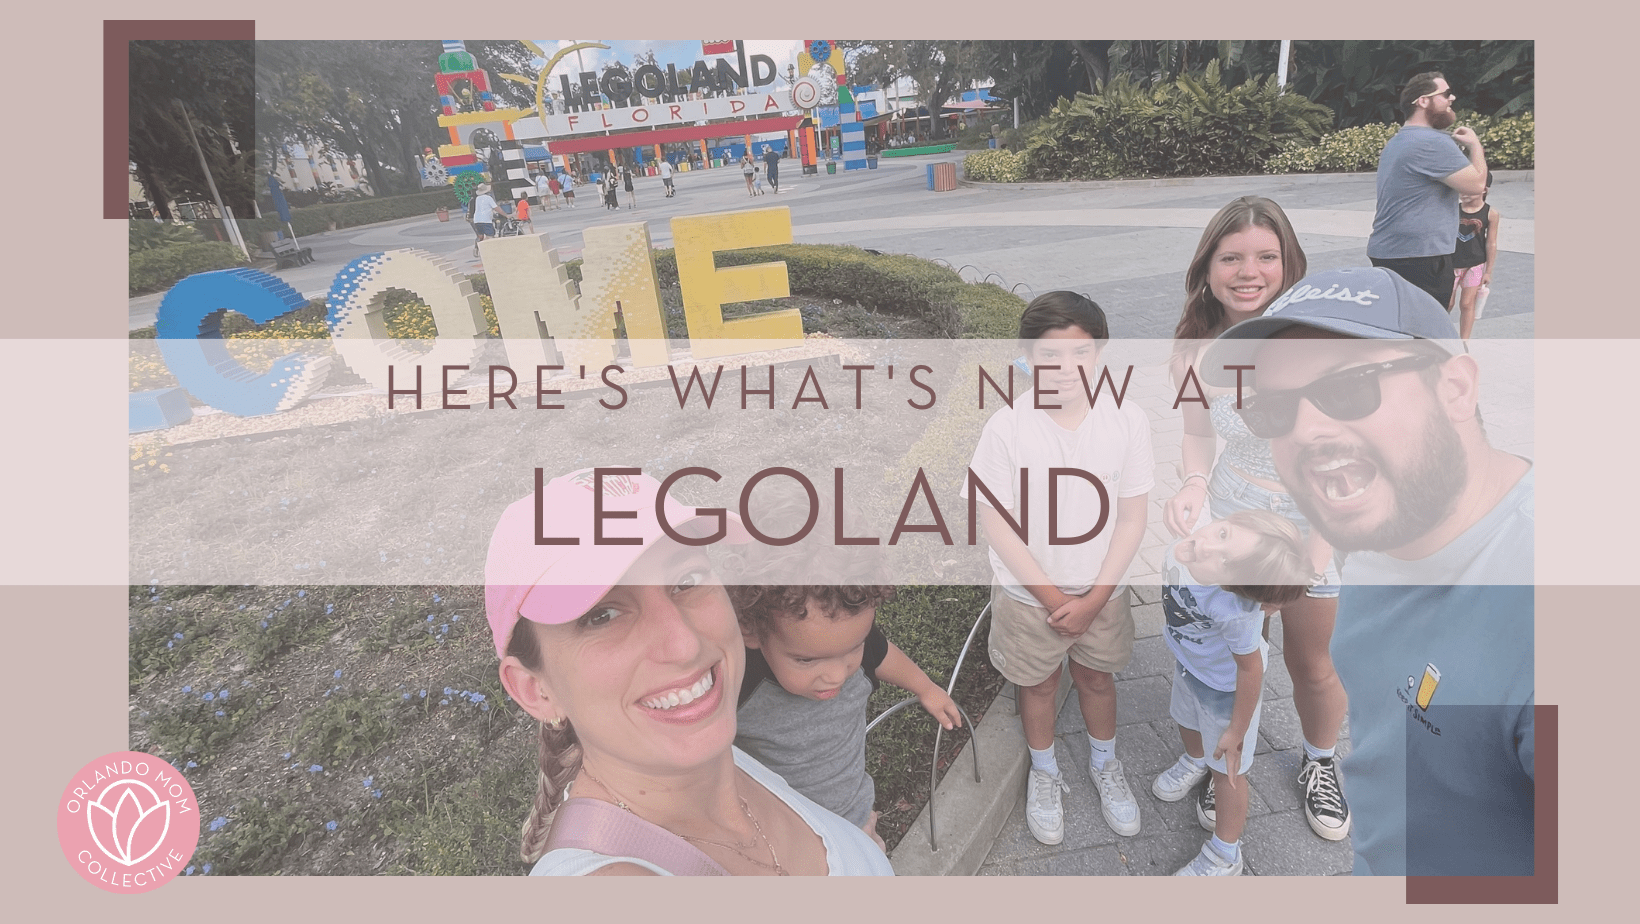 family of 6 outside lego land florida with 'here's what's new at Legoland' in text in front of image